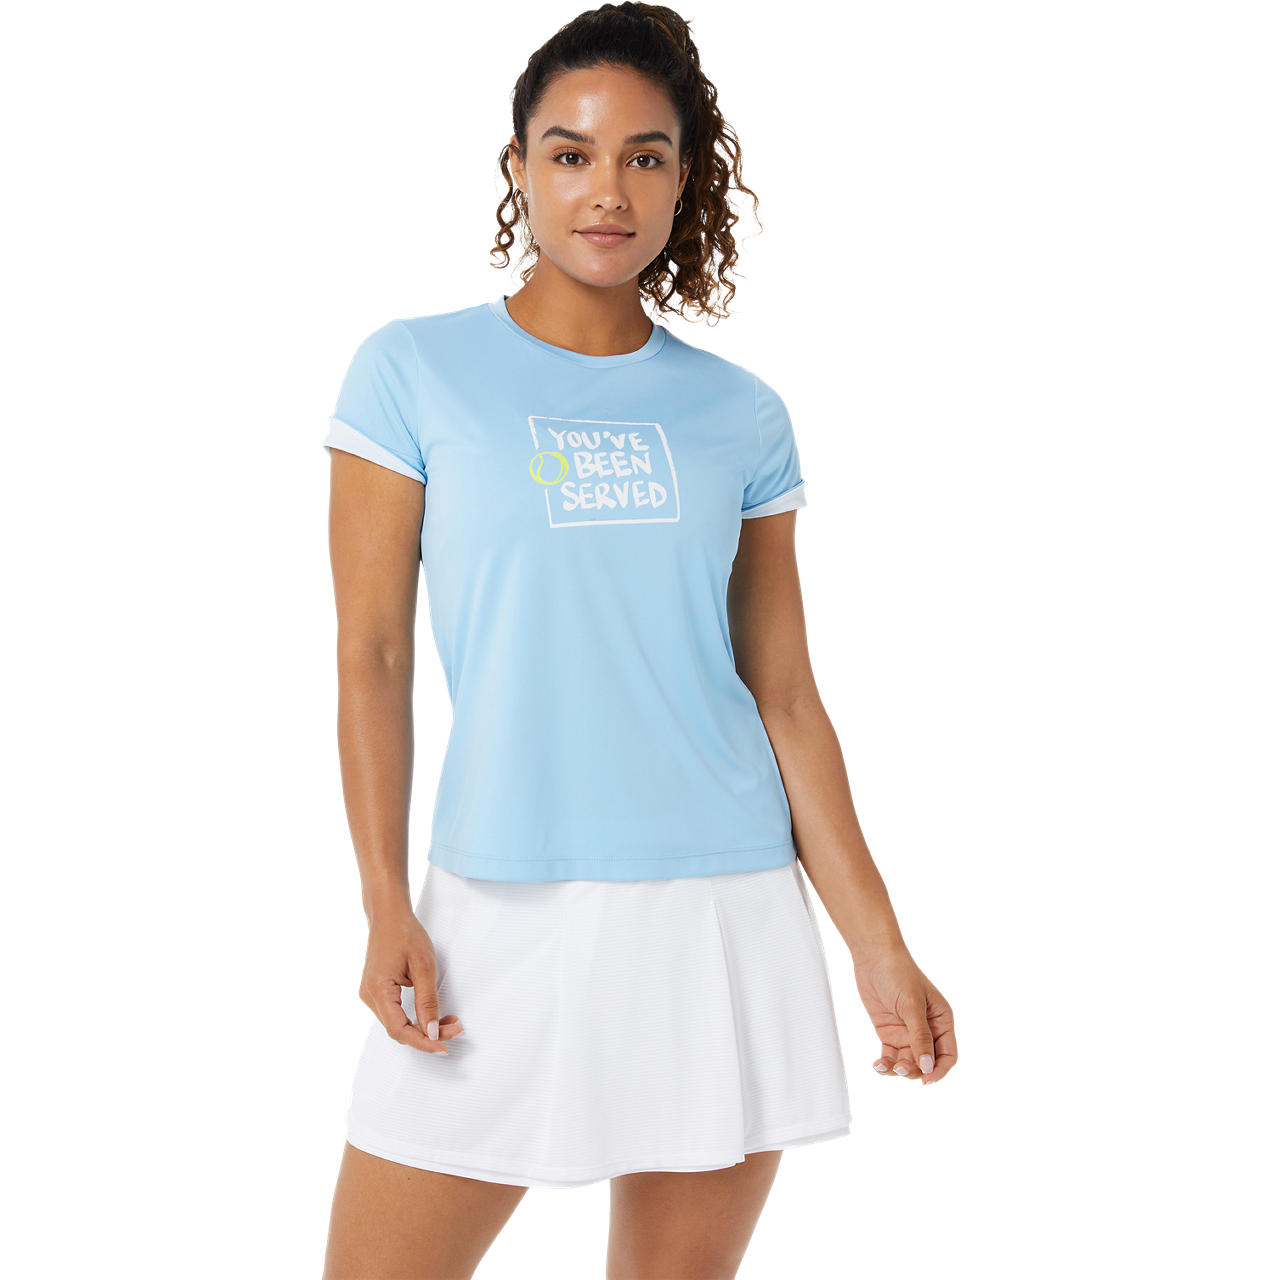 ASICS WOMEN COURT GRAPHIC TEE image number null